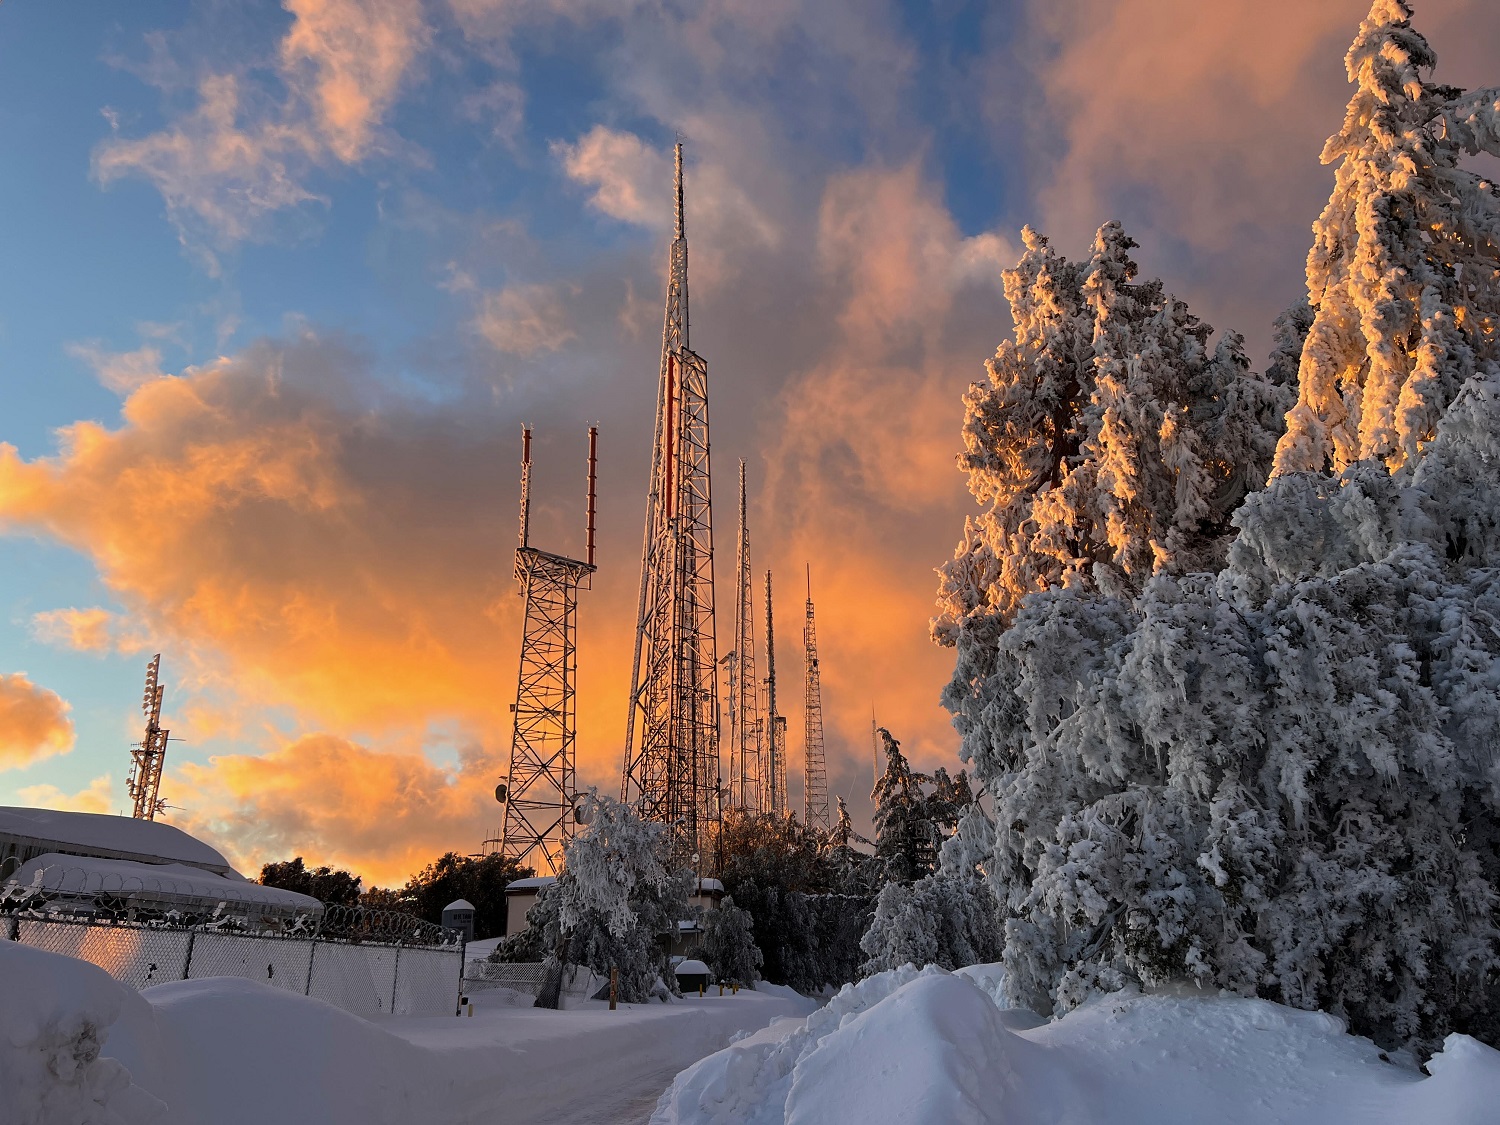 Sunset photo of snow on the Mount Wilson tower farm in California